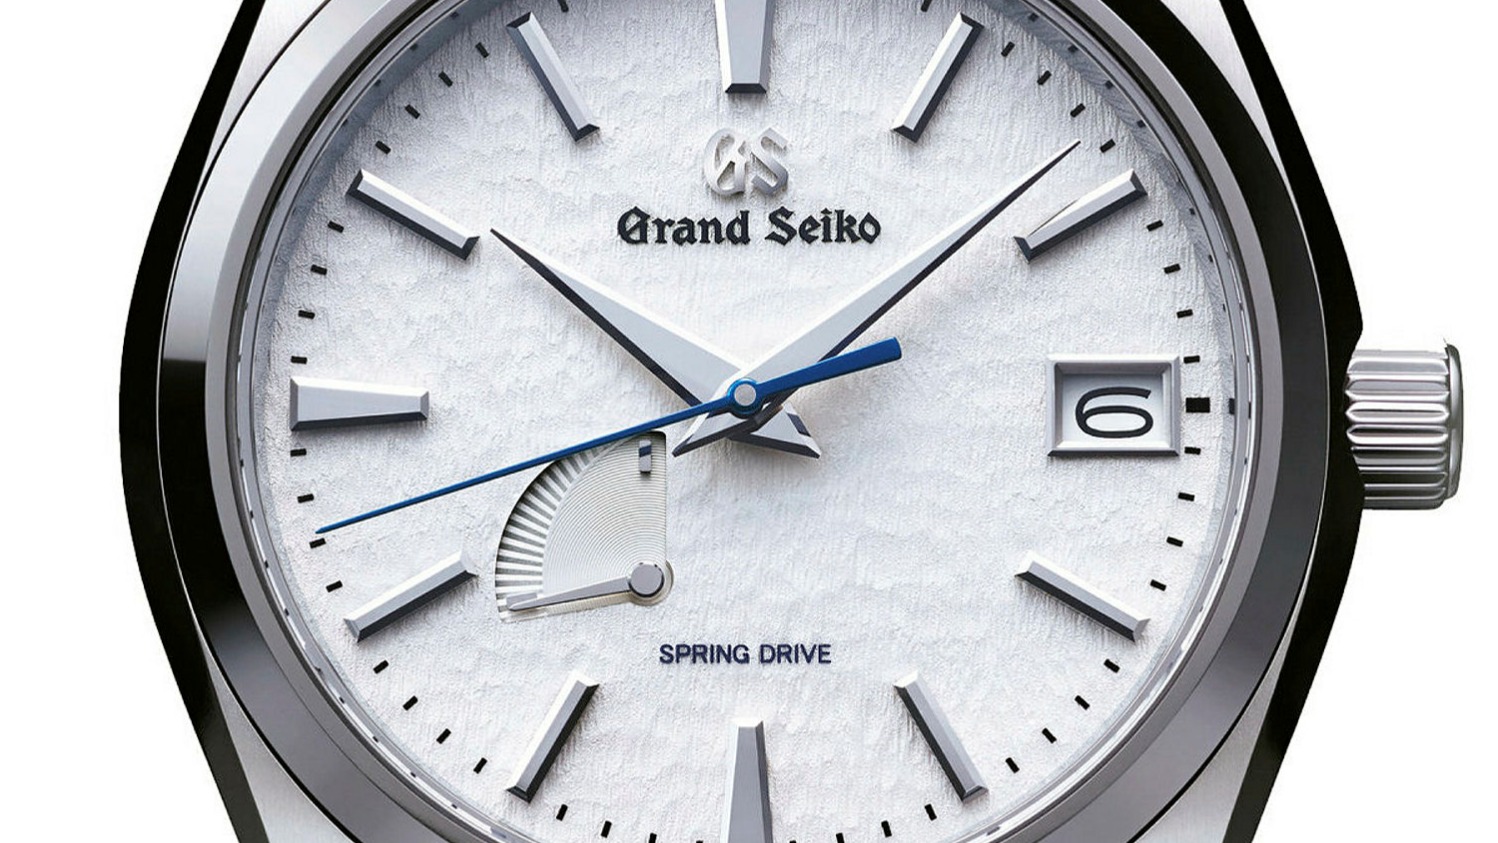 Deconstructed Watch: Grand Seiko Snowflake | Financial Times